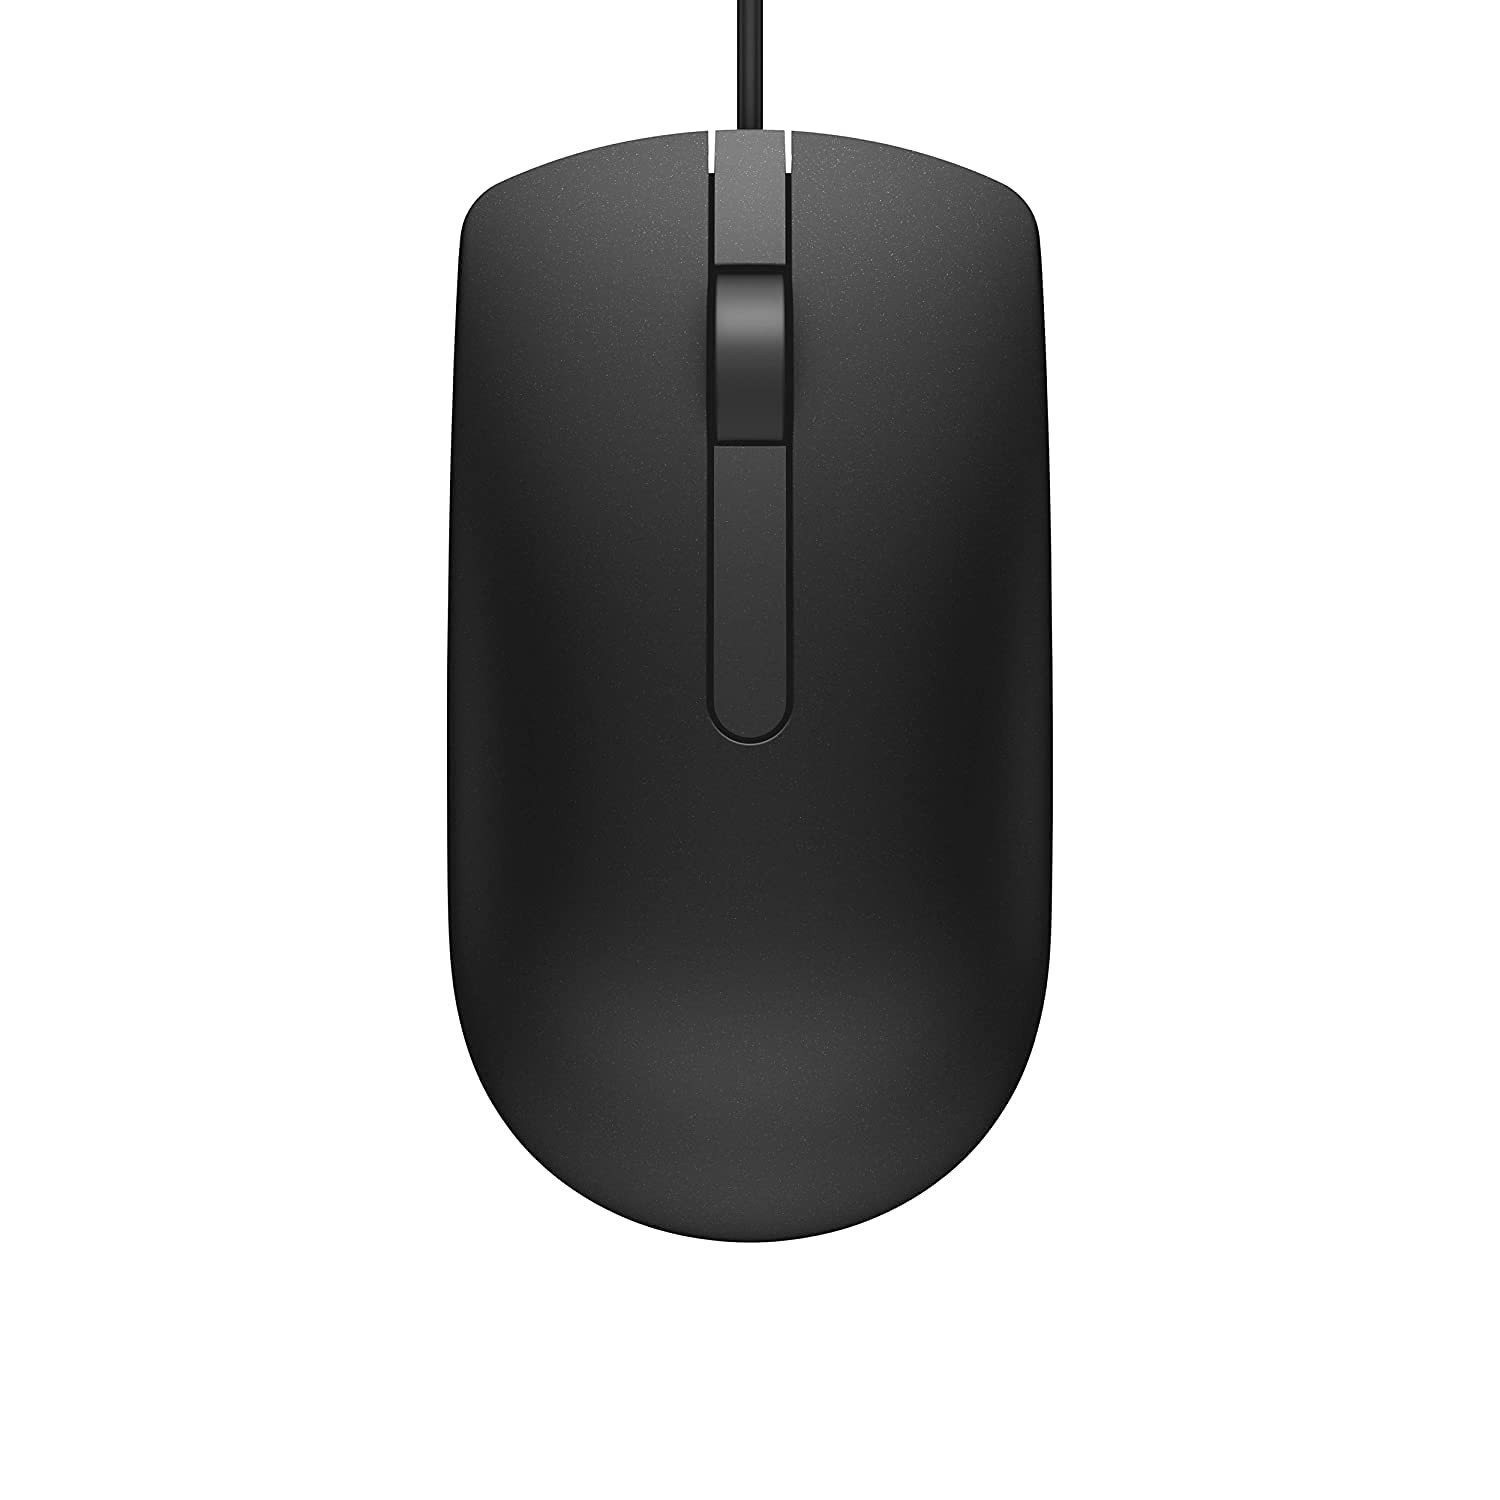 Dell MS116 1000Dpi USB Wired Optical Mouse, Led Tracking, Scrolling Wheel, Plug and Play